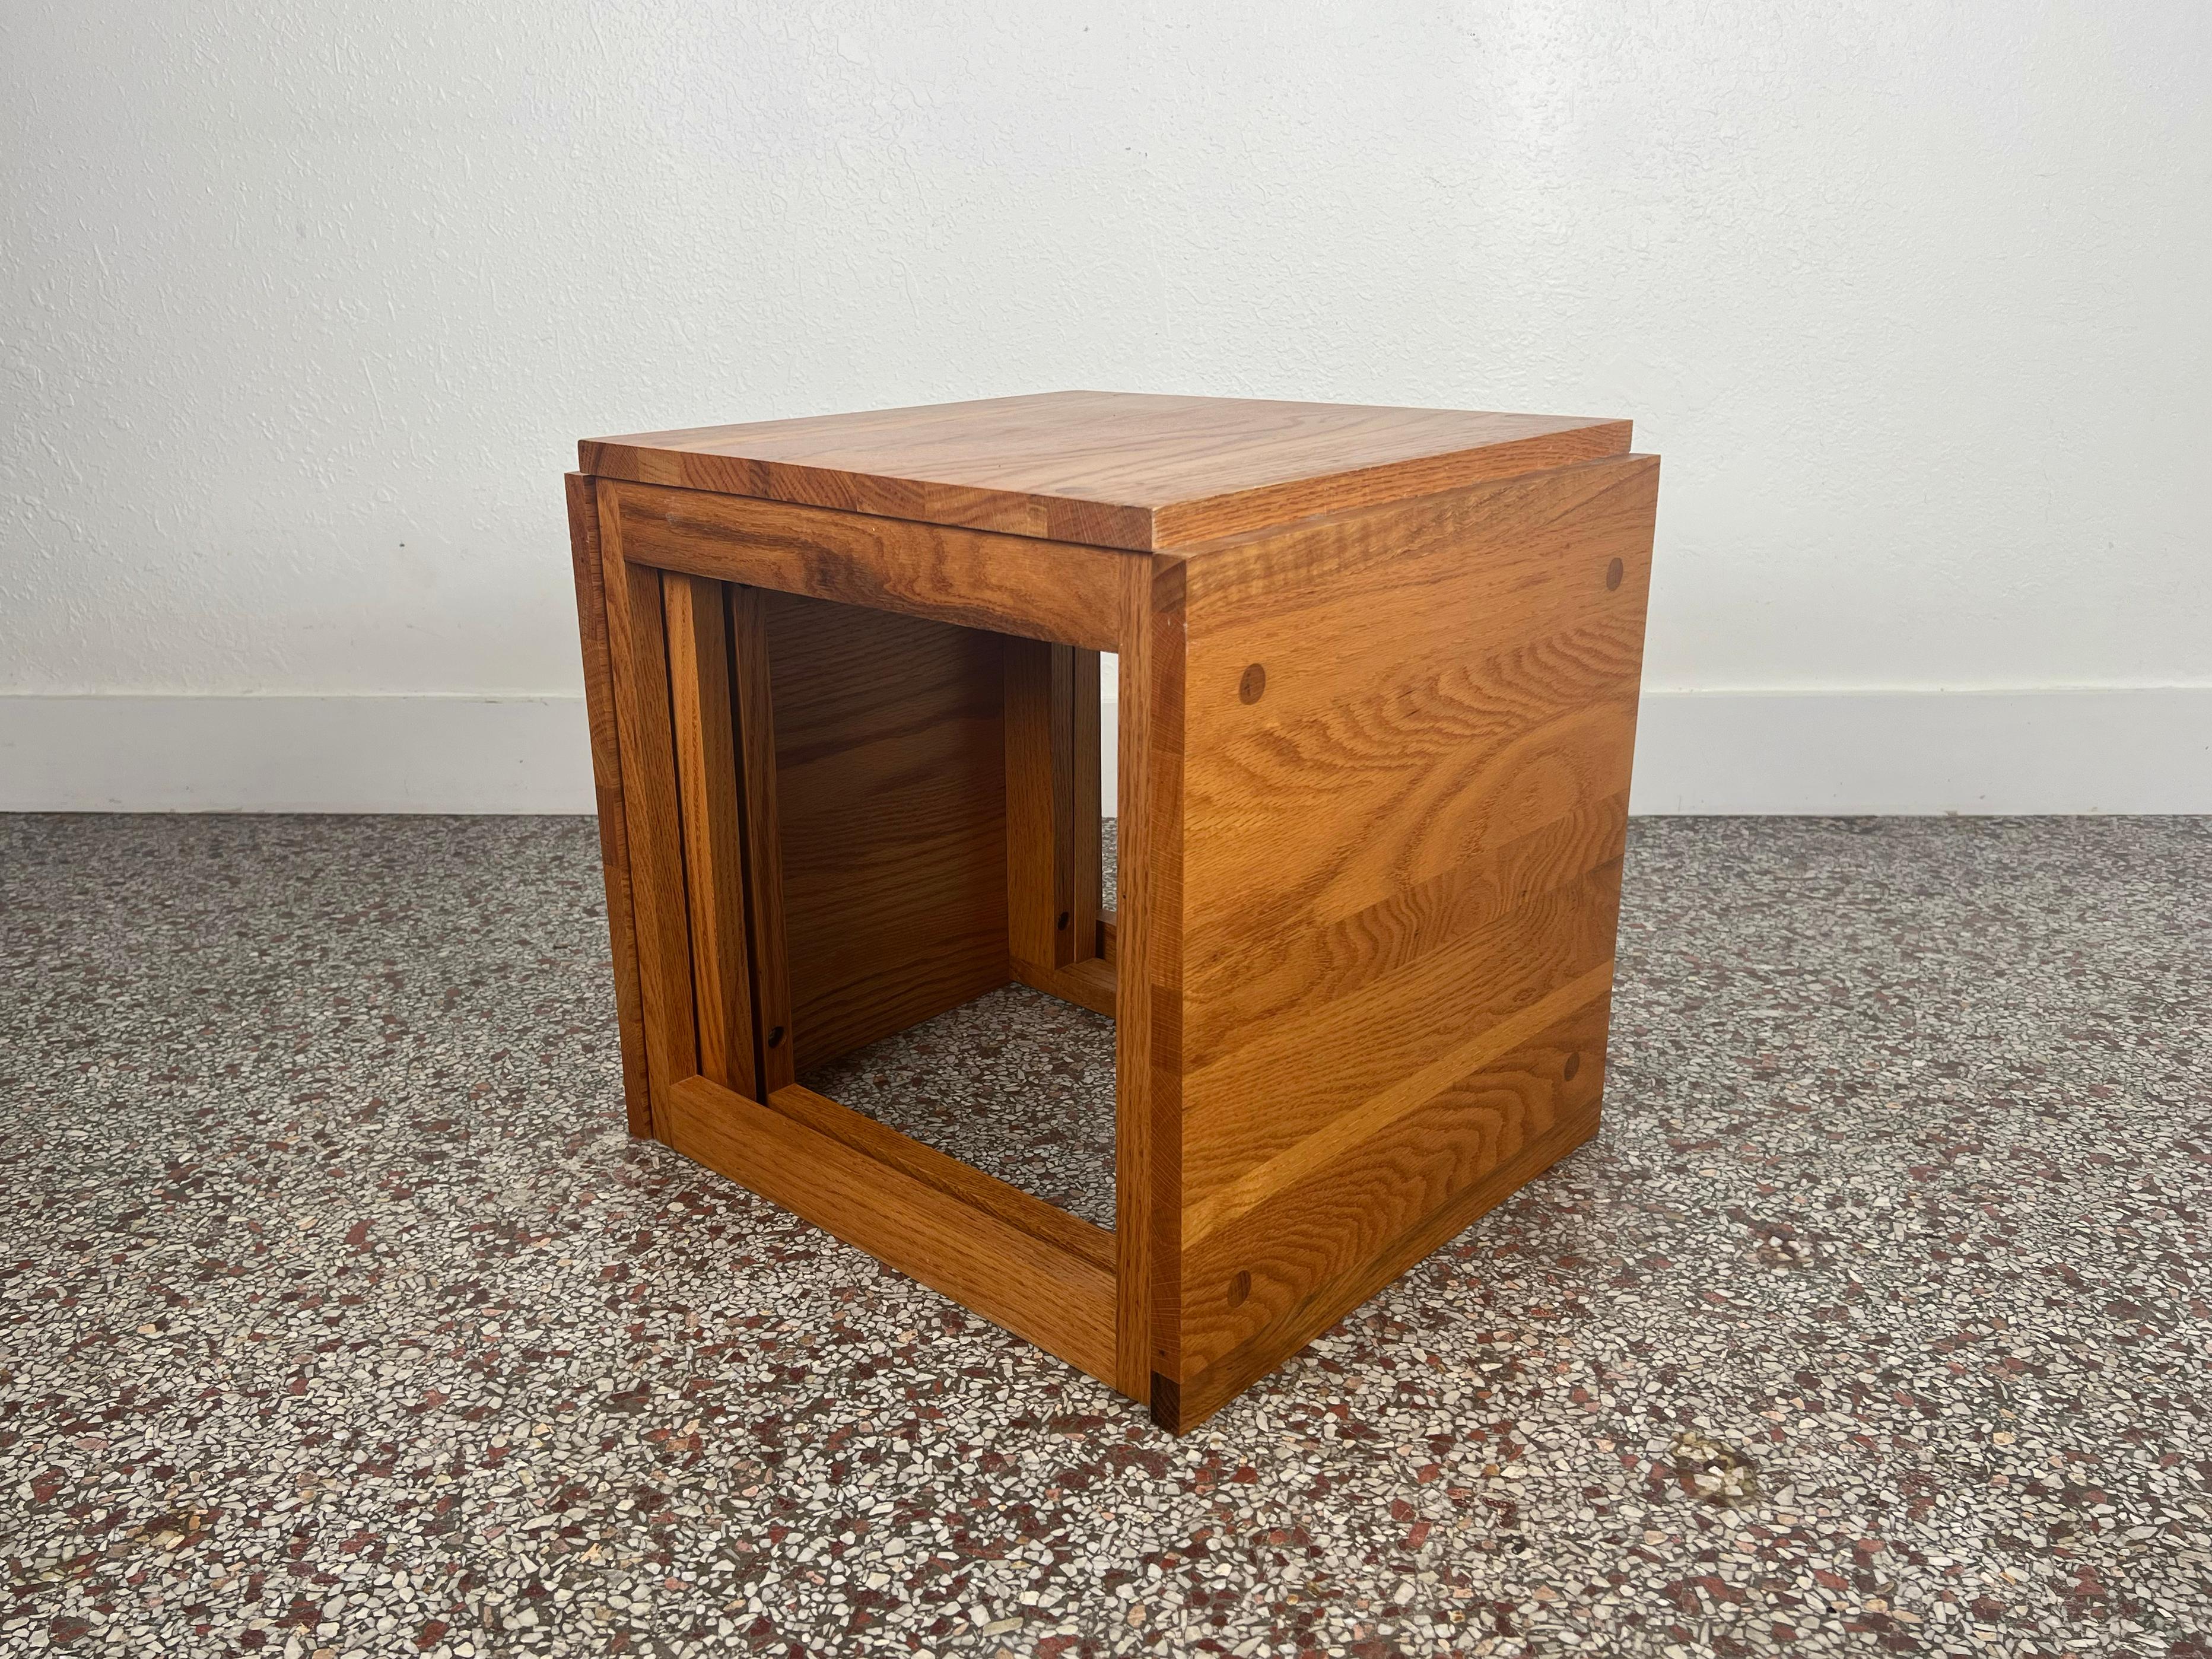 Vintage set of three studio crafted nesting tables crafted in solid oak with mortise and tenon detailing on surfaces. Tables fit together to form one singular cube. 

Origin: USA

Year: 1970s

Dimensions: 19